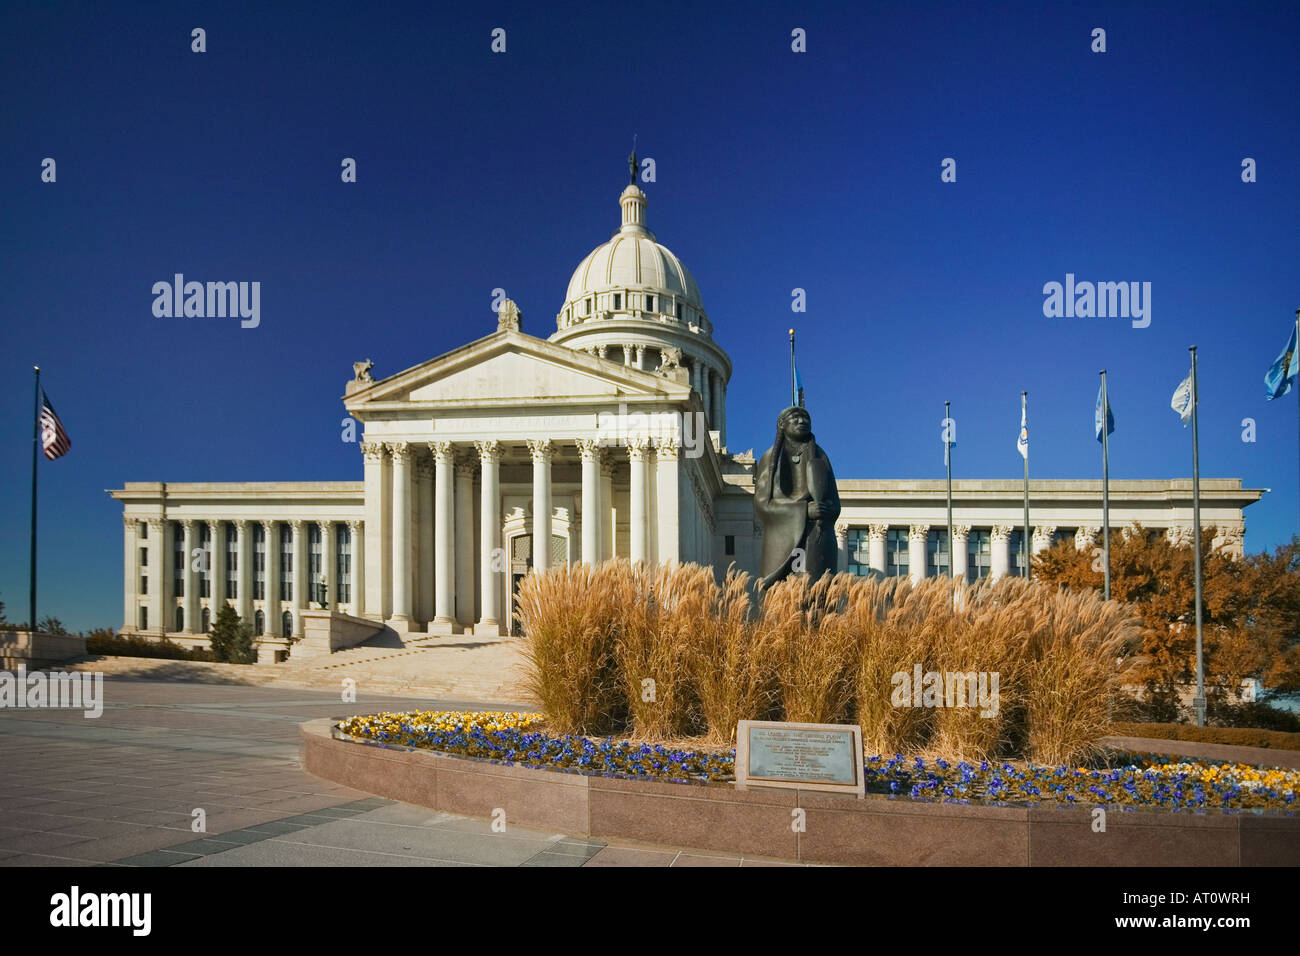 The Oklahoma State Capitol, located in Oklahoma City, is the seat of